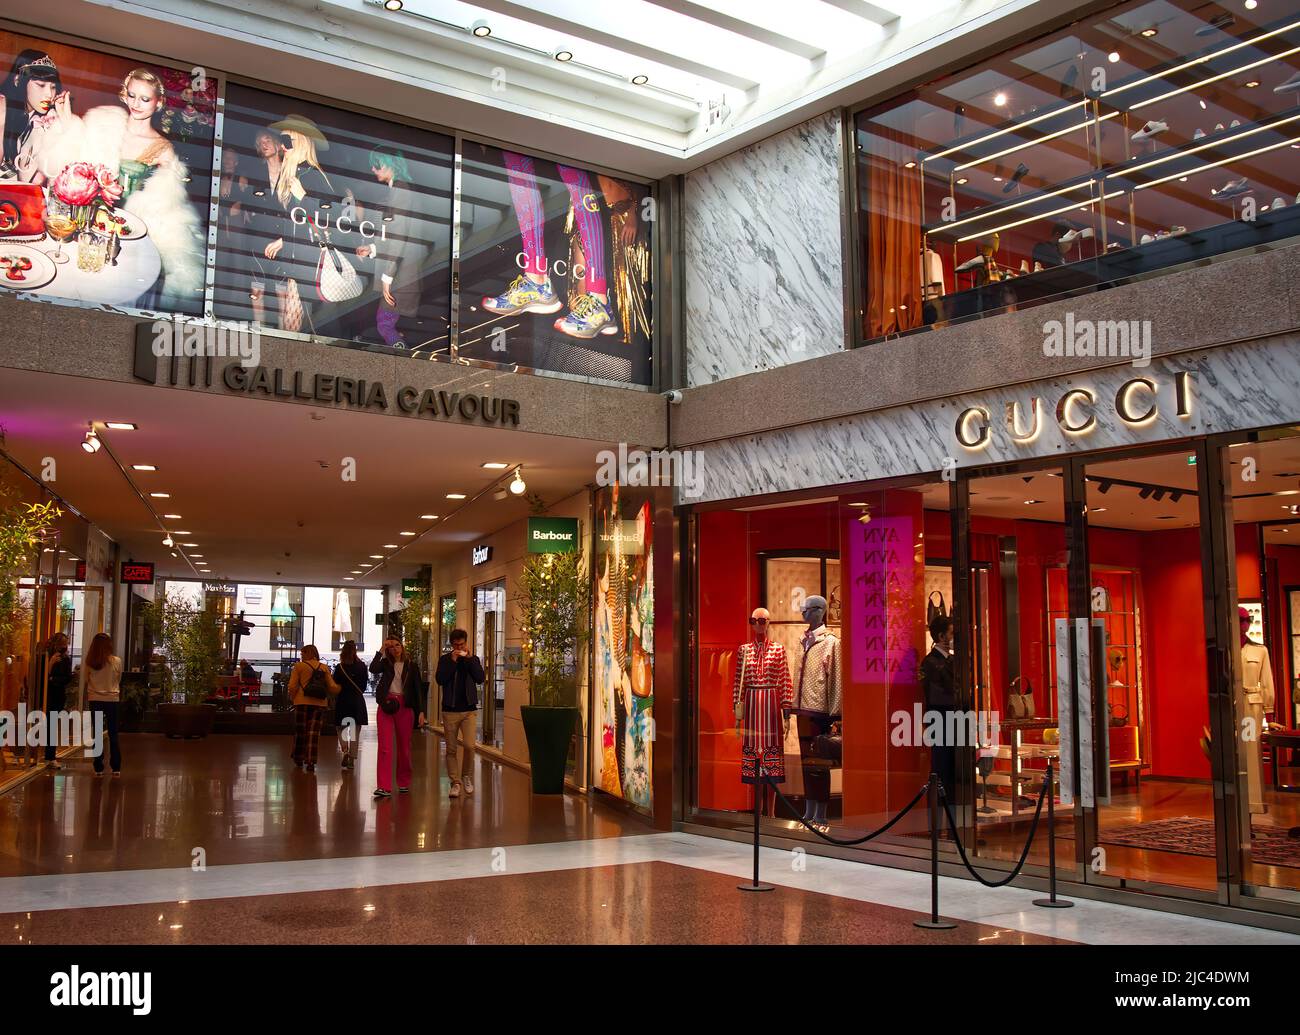 Gucci store exterior in Galleria Cavour, famous luxury shopping center in  Bologna. Italy Stock Photo - Alamy